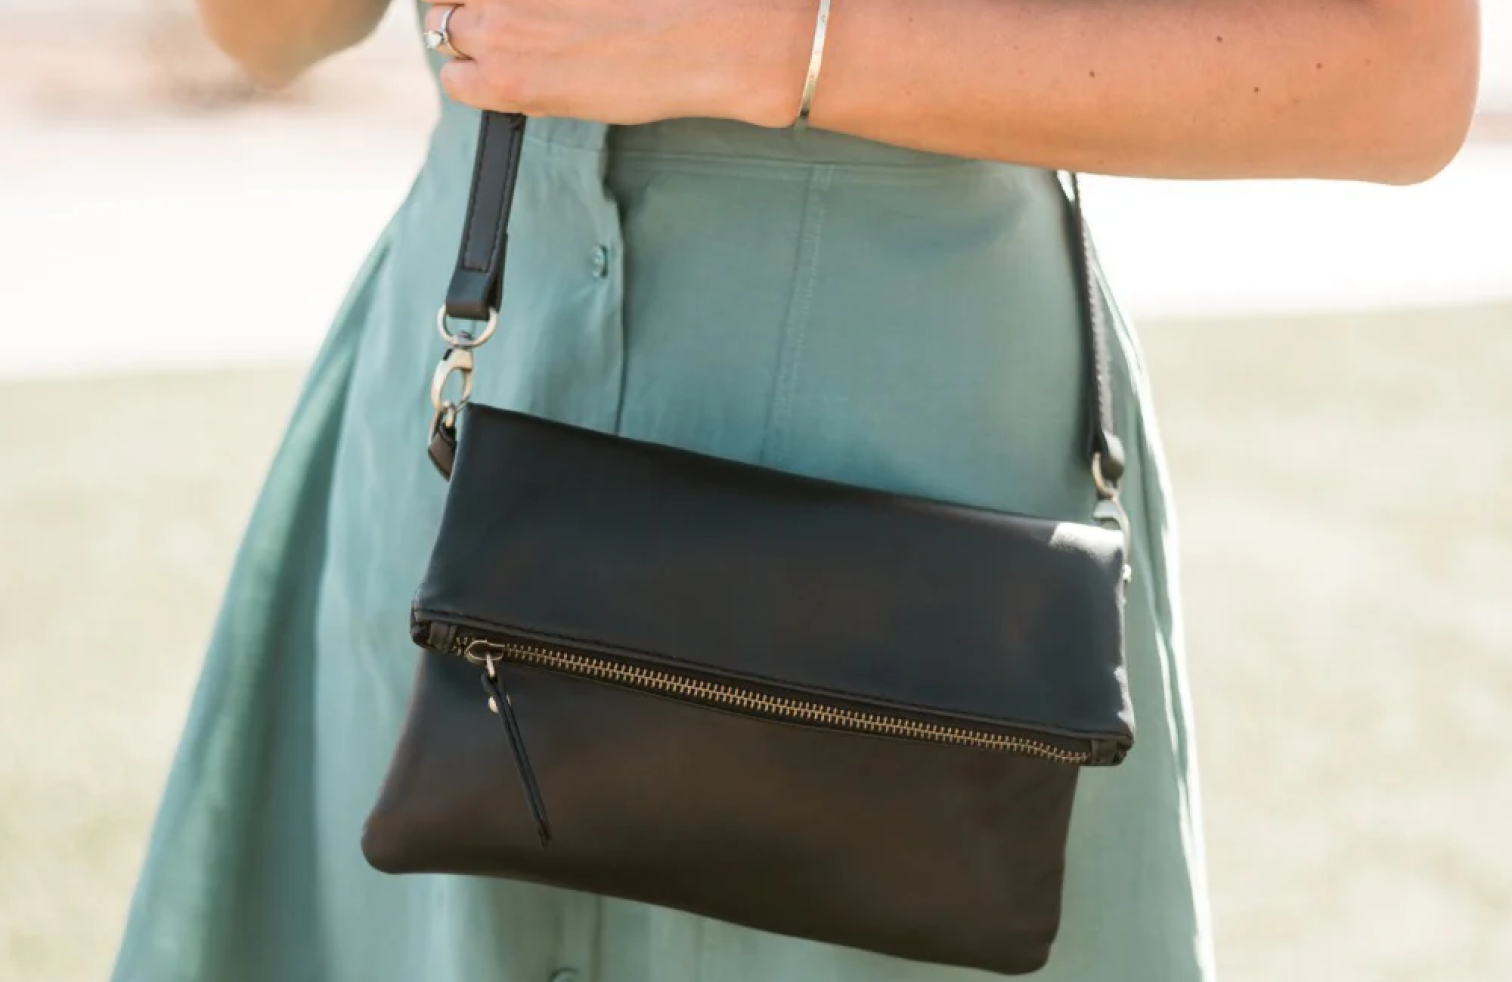 Short Crossbody Straps - A Trendy/Fashionable New Way to Carry